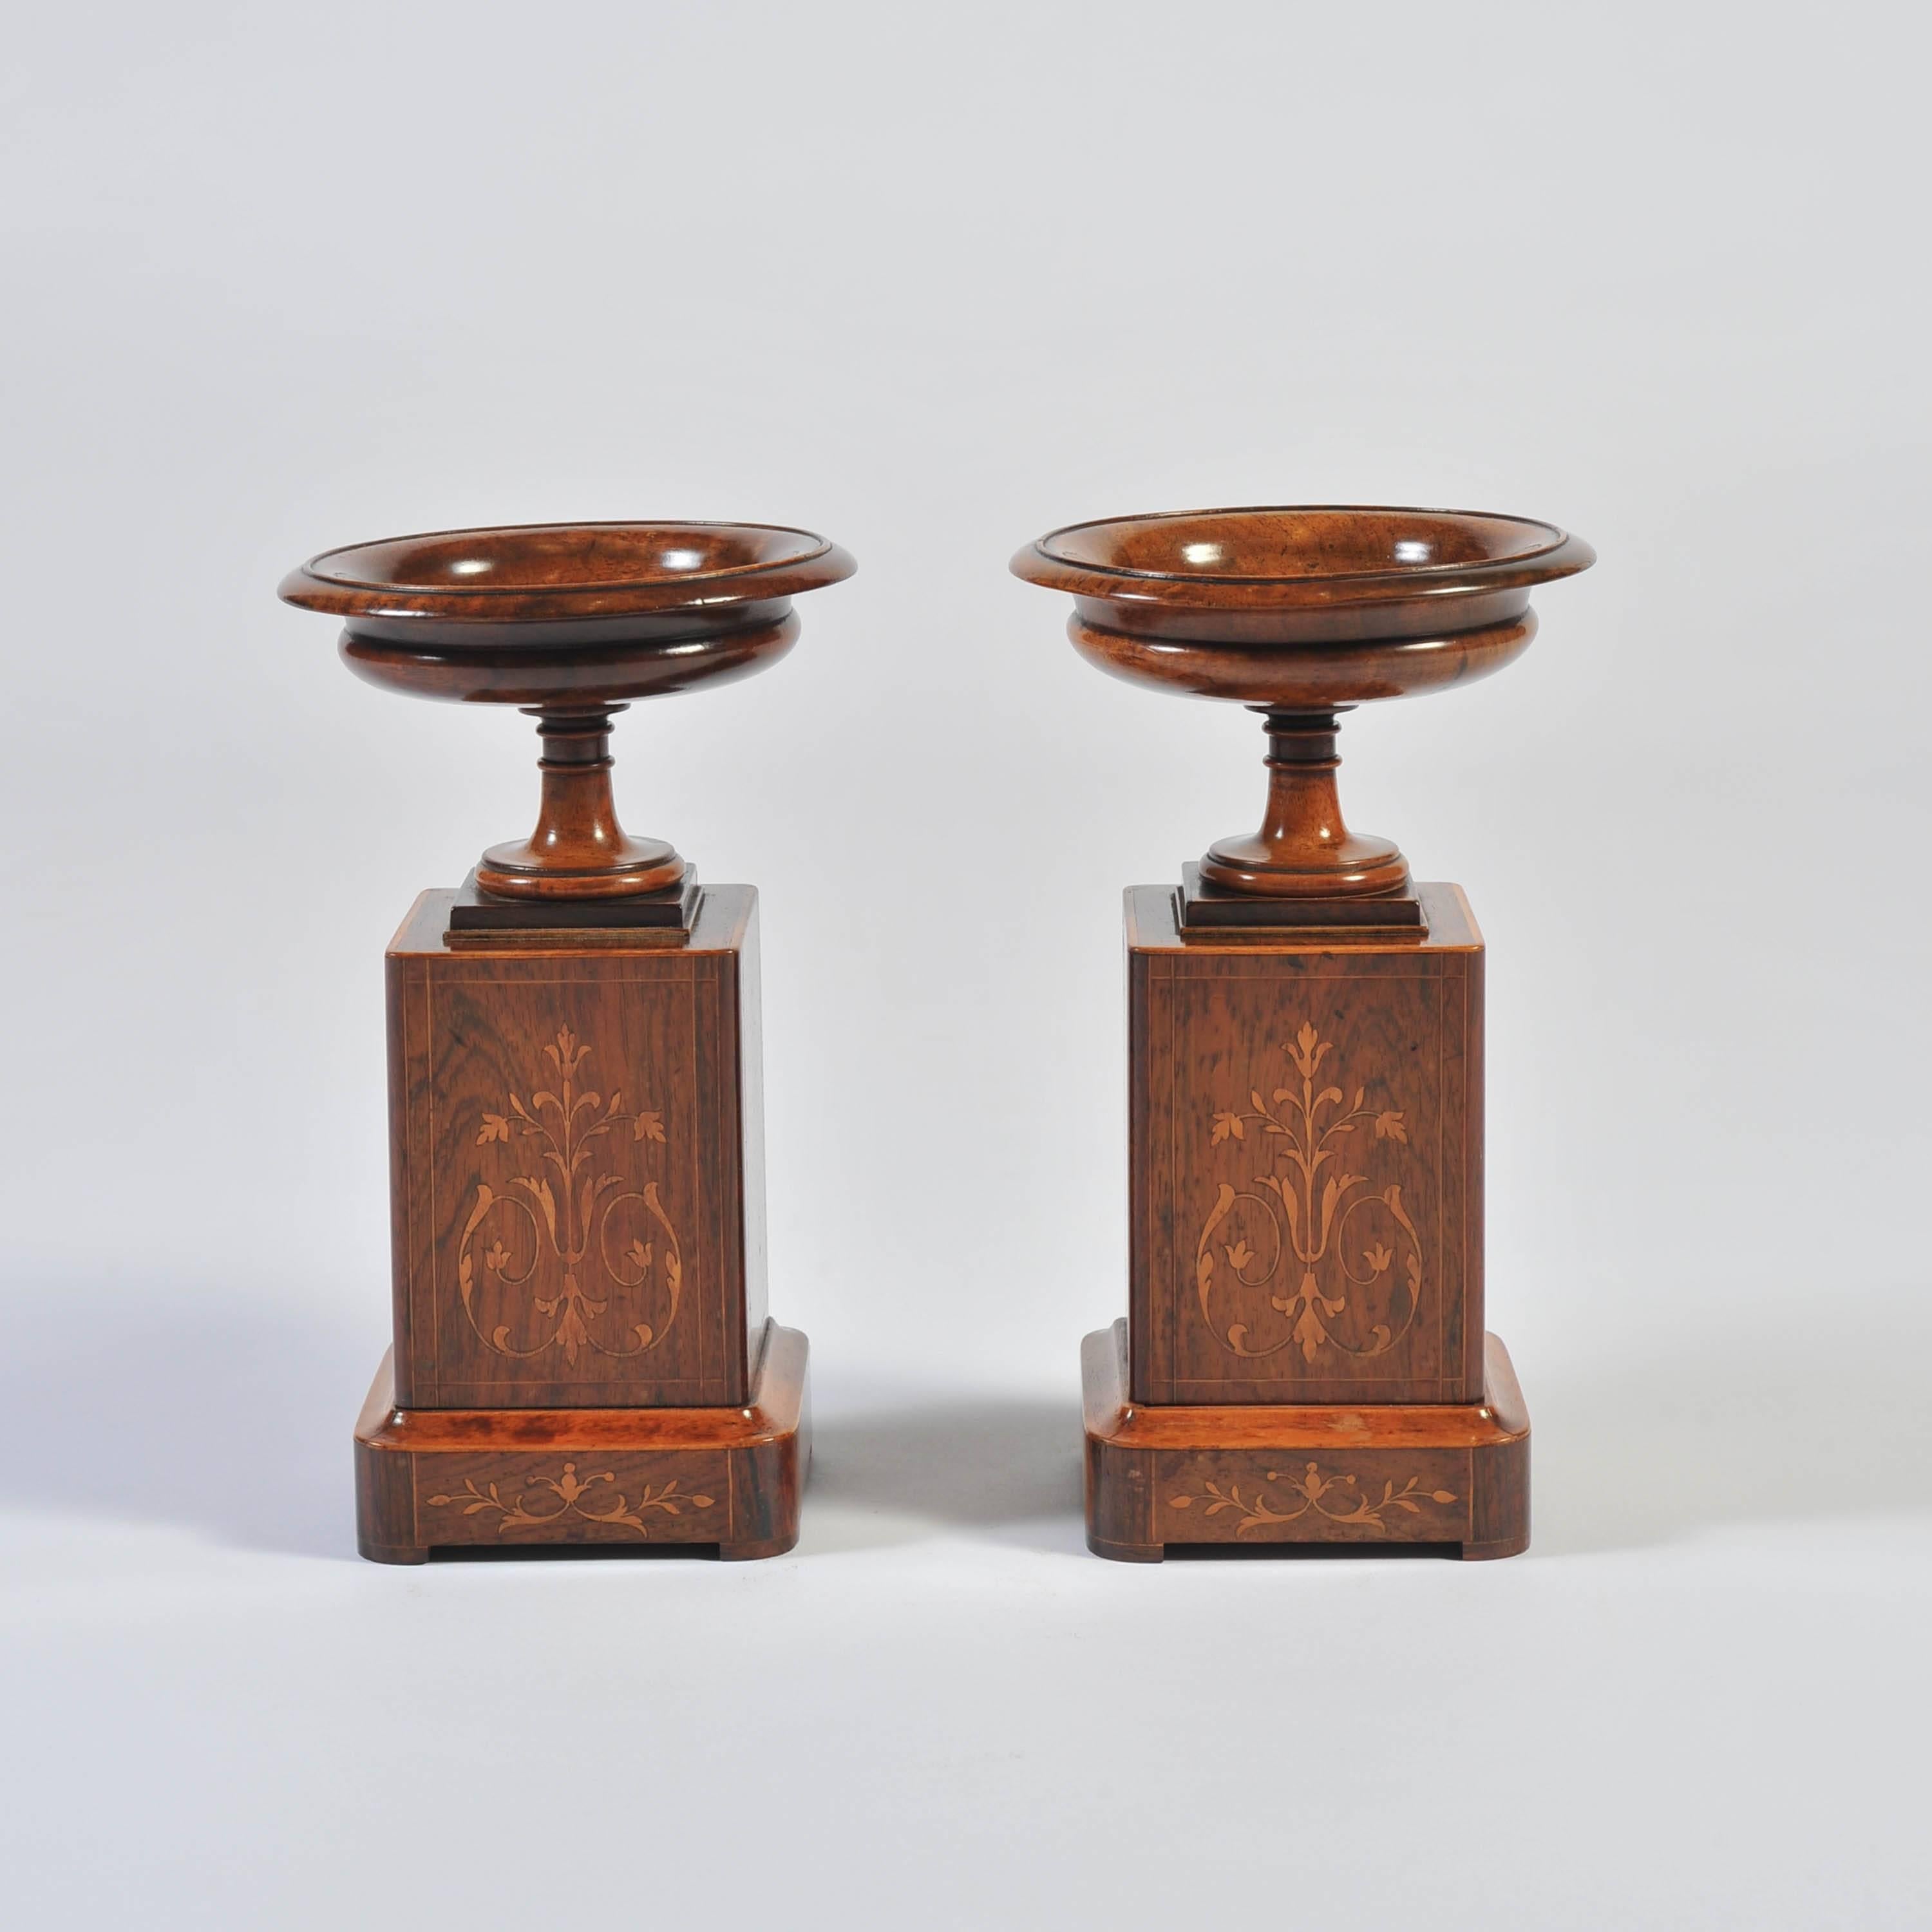 Neoclassical Pair of 19th Century Marquetry Tazza, in Rosewood, Walnut and Boxwood 